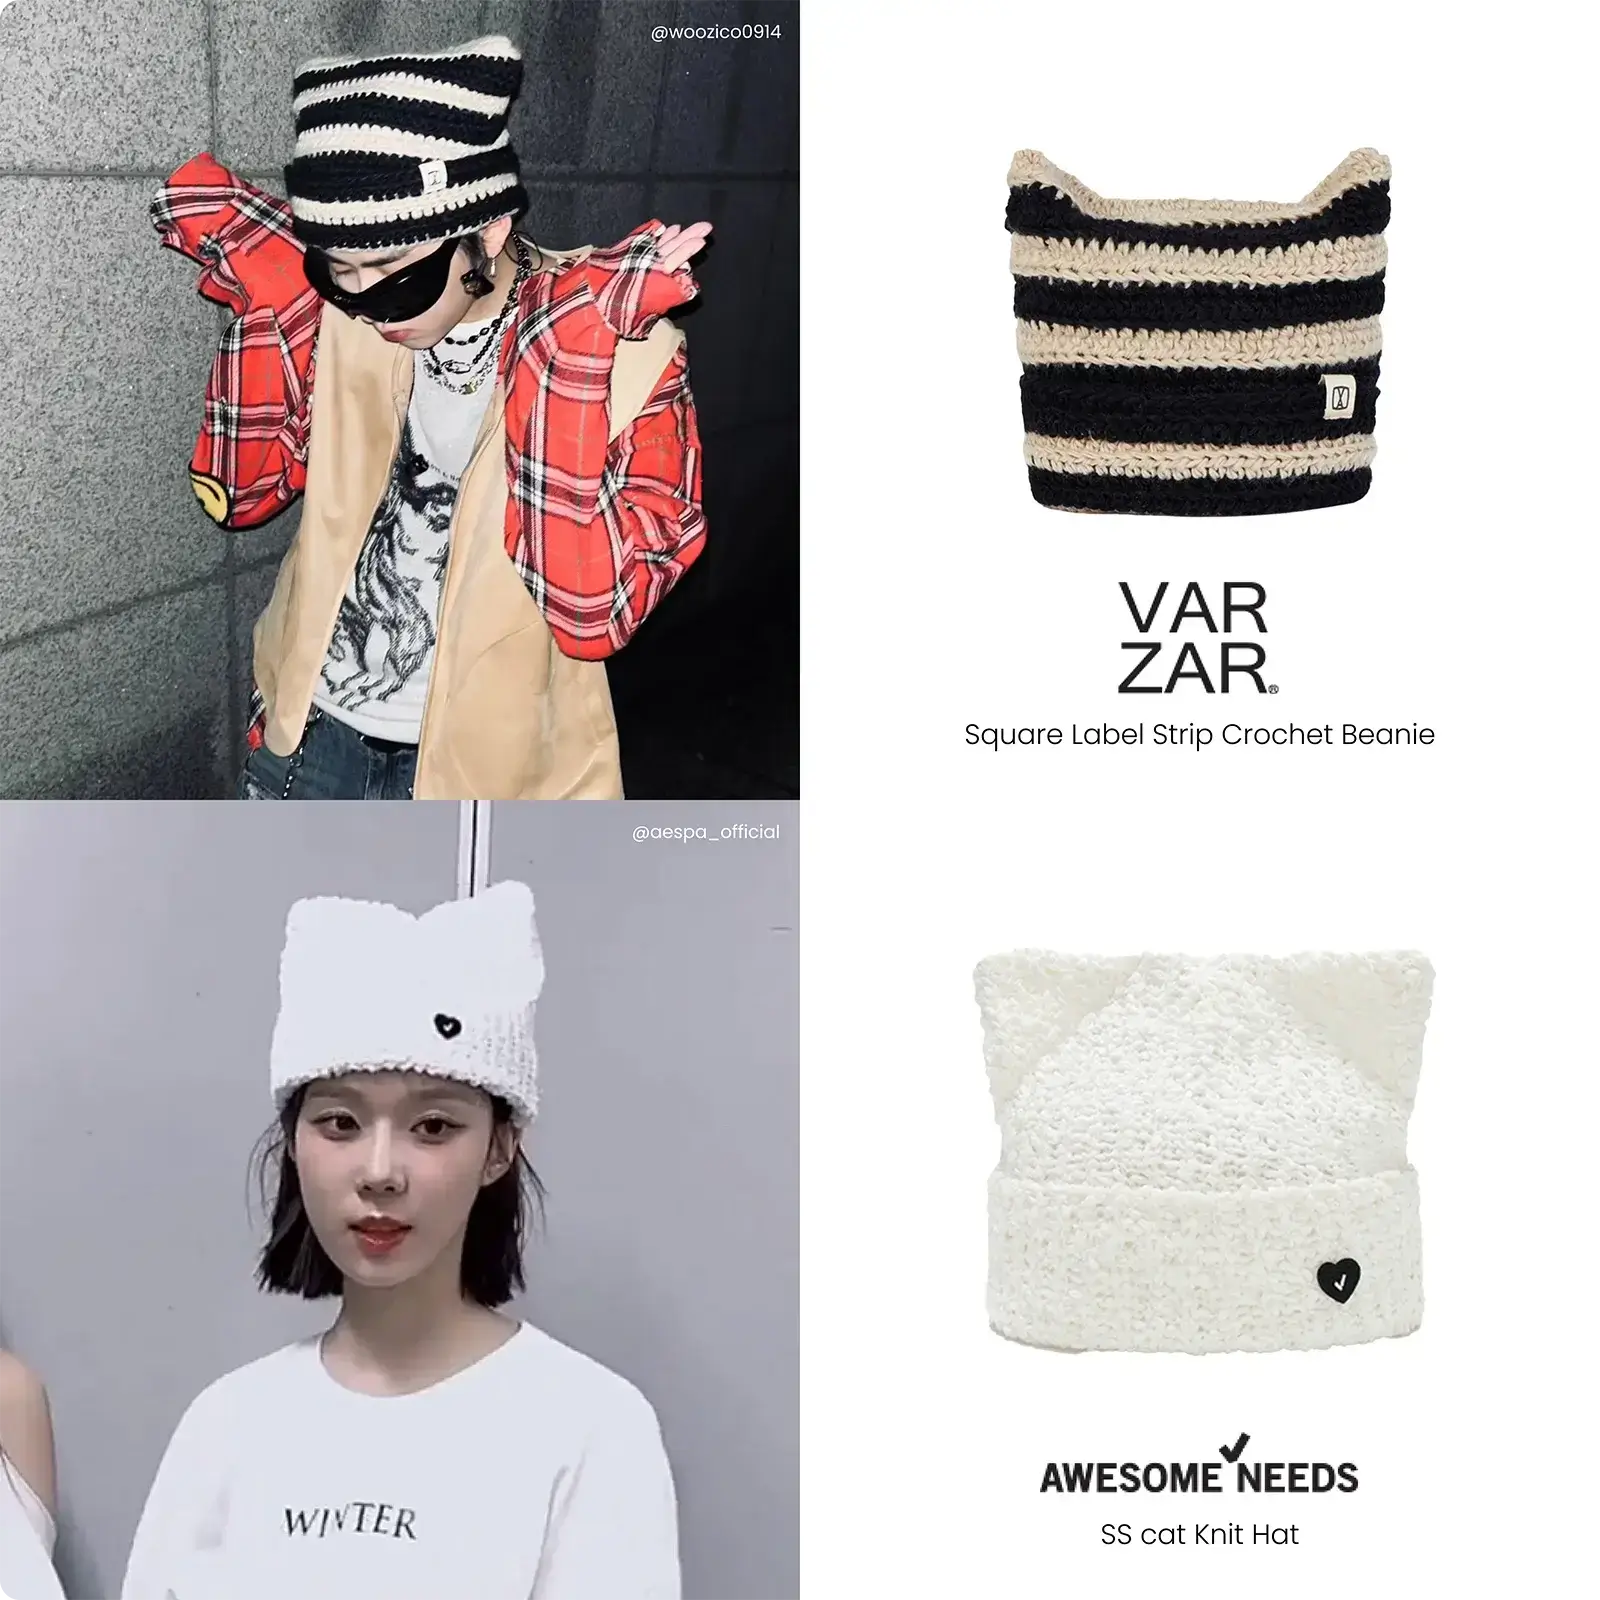 Korean cat beanies from Varzar and Awesome Needs